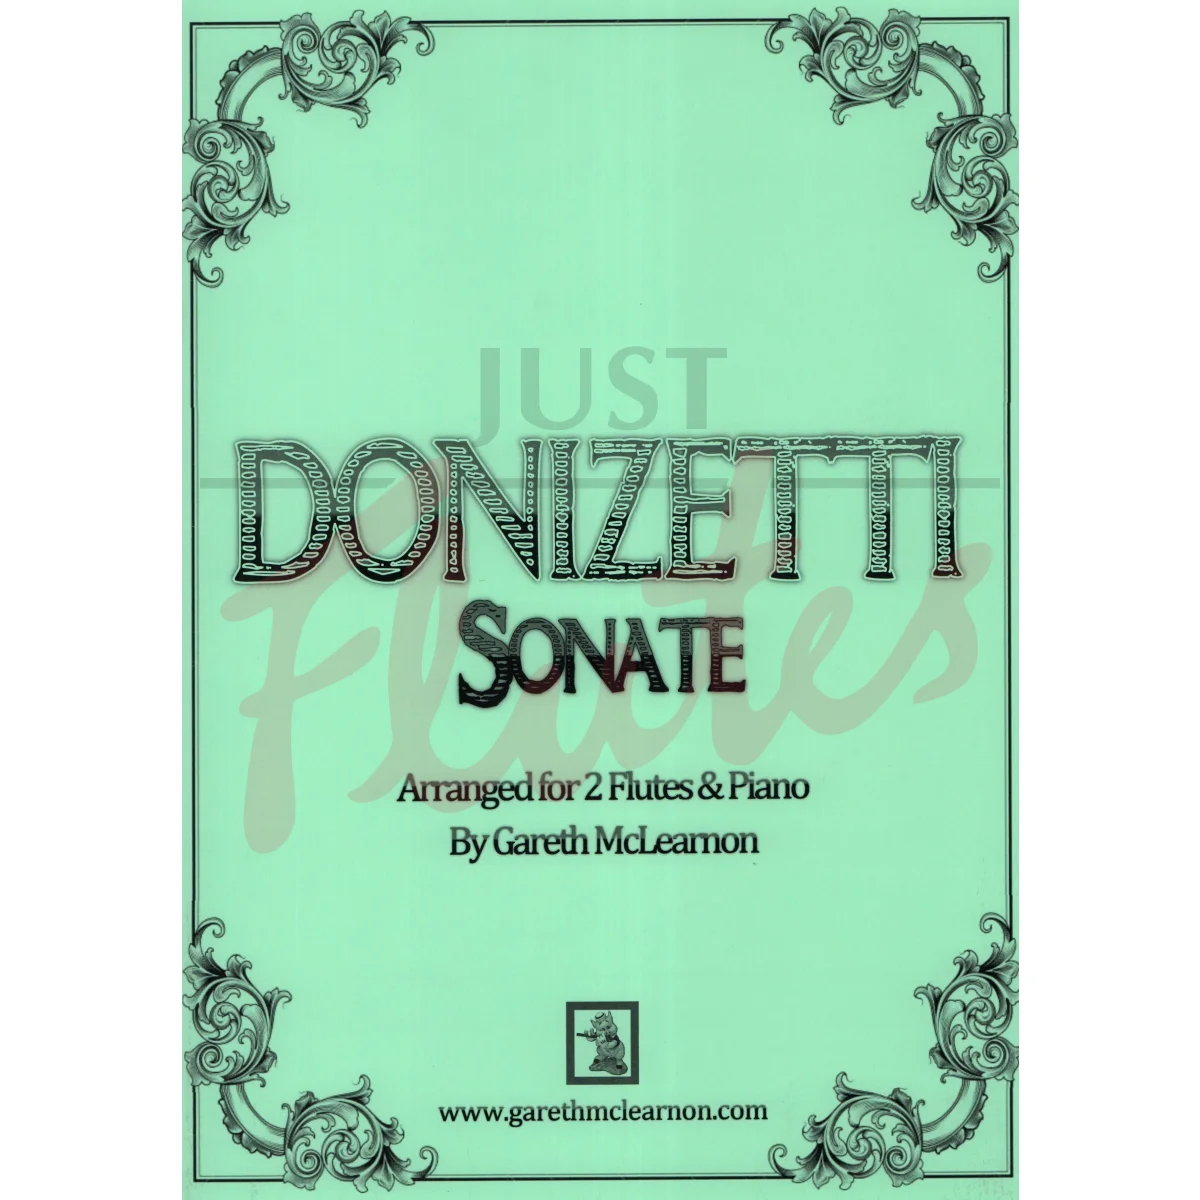 Sonate for Two Flutes and Piano